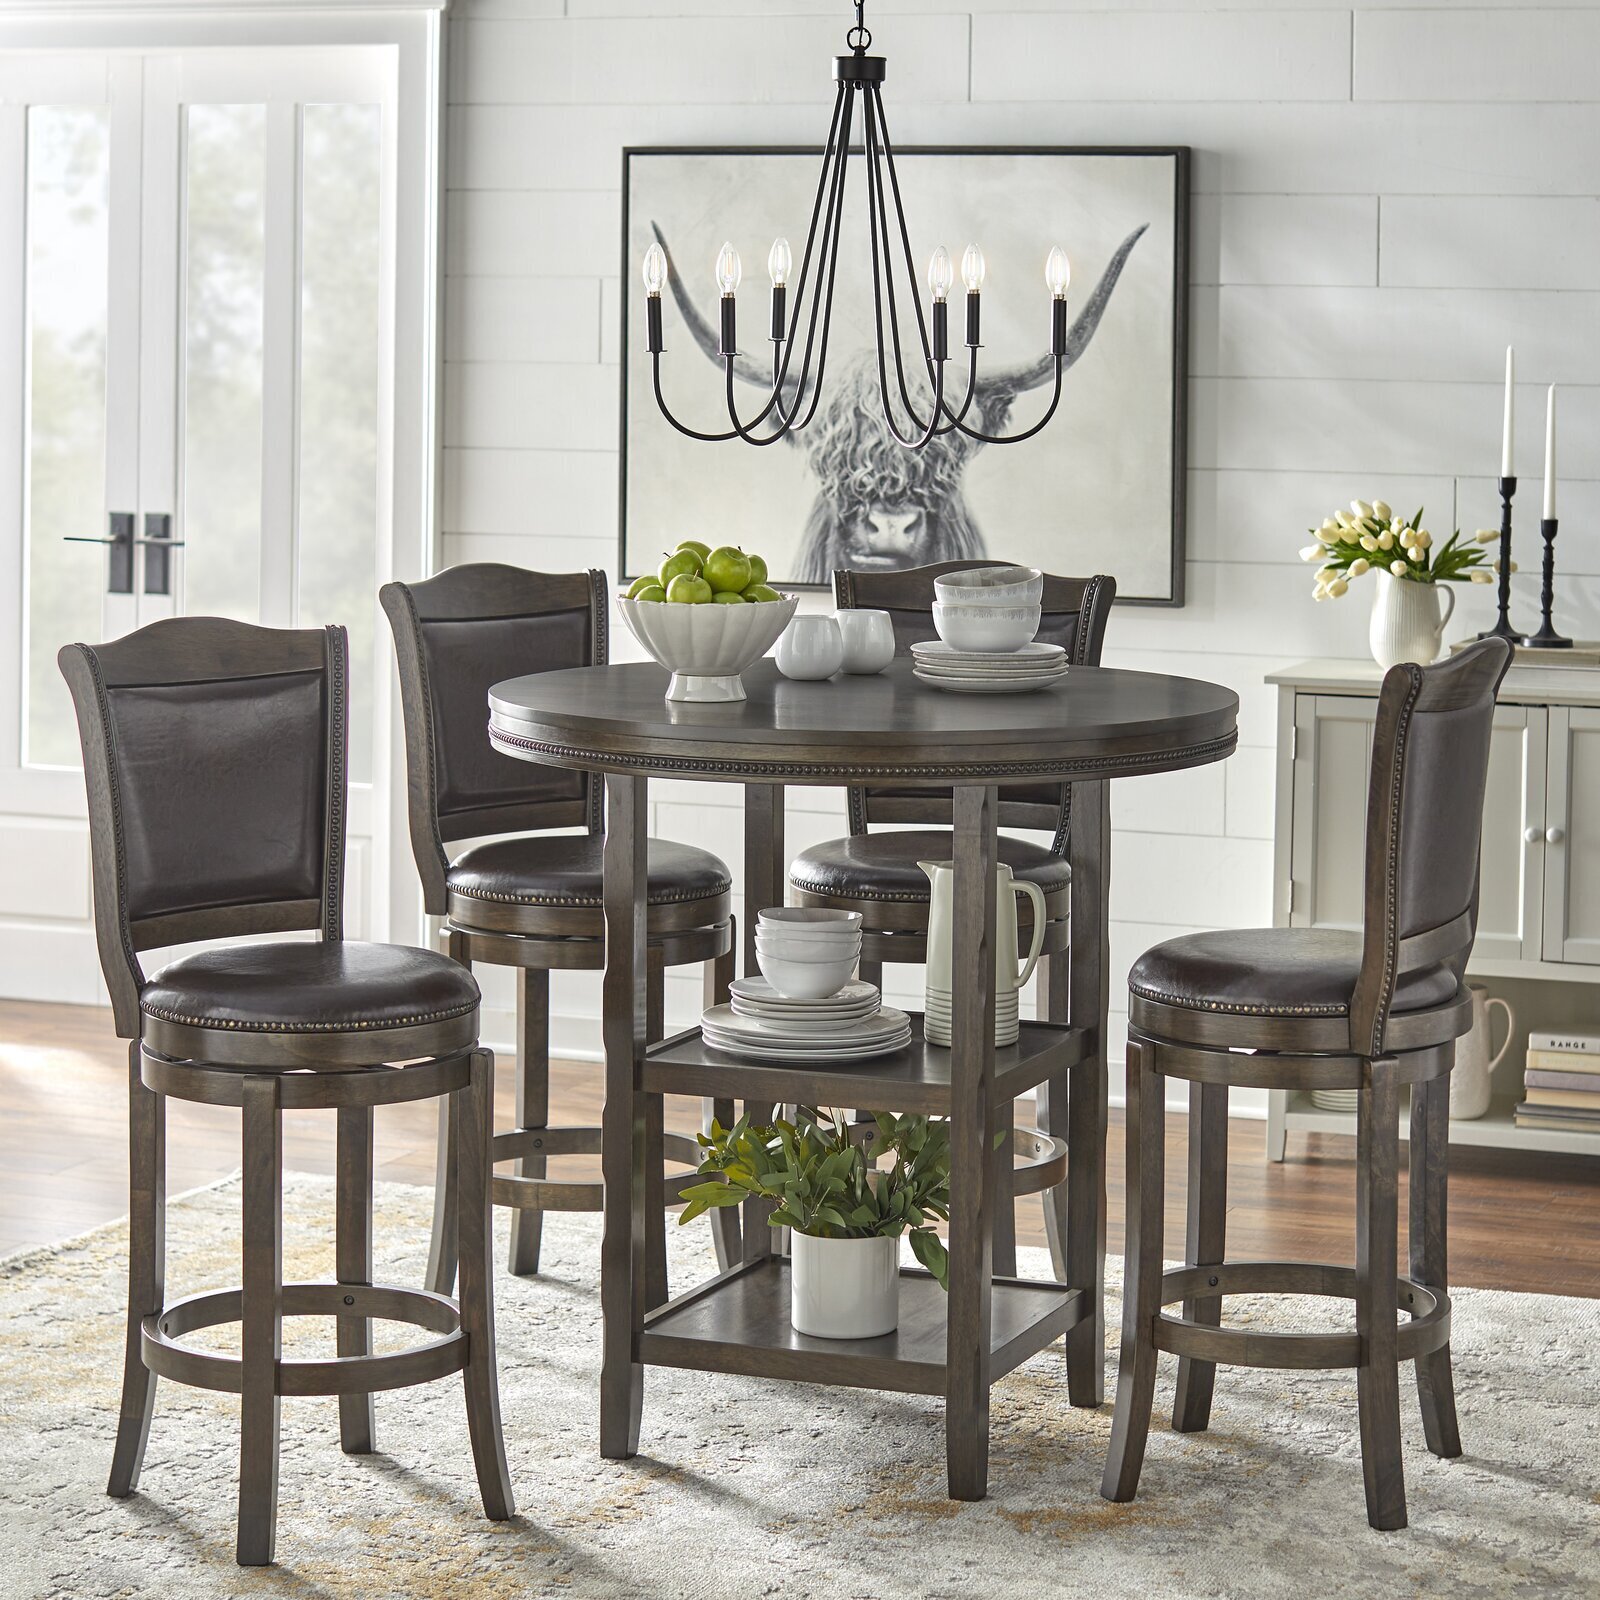 Elegant Round Bar Table and Chairs